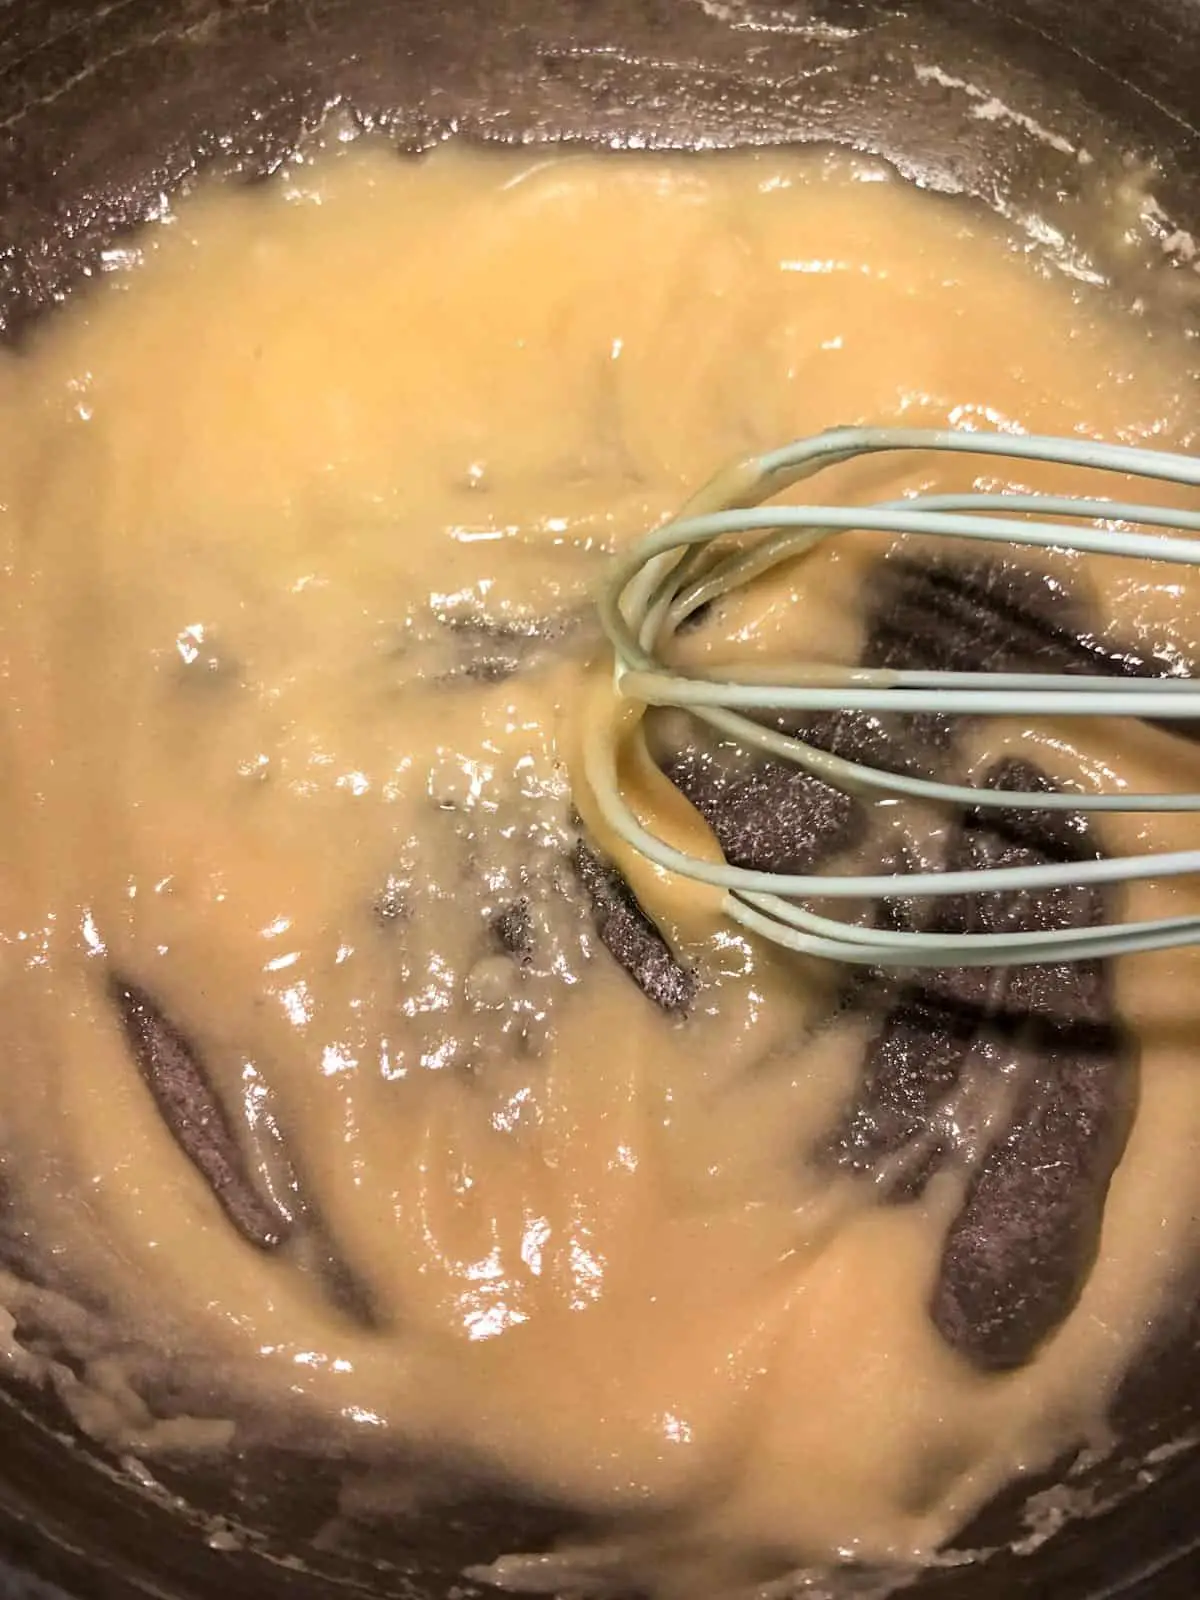 Butter and flour roux in a saucepan with a blue whisk.